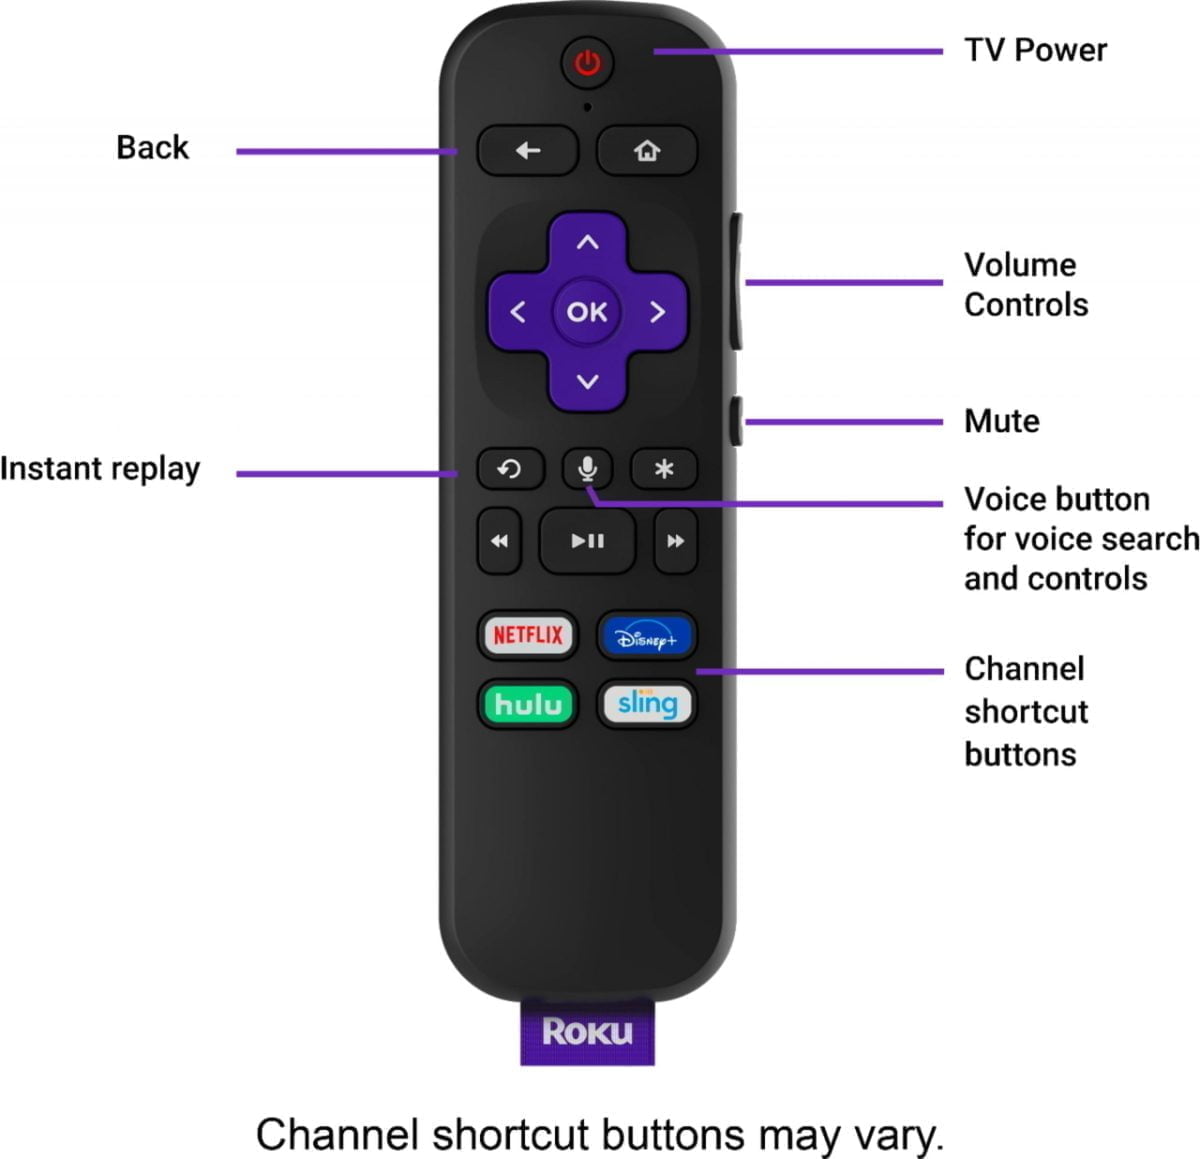 5948005Cv12D Scaled Roku &Lt;H1&Gt;Roku Streaming Stick+ 4K Streaming Media Player With Voice Remote With Tv Controls - Black&Lt;/H1&Gt; Enjoy Nonstop Entertainment With The Roku Streaming Stick+. Its Wireless Receiver Provides A Strong Signal For Smooth Streaming In Rooms Far From The Router, And It Supports 4K, Hd And Hdr Resolutions For Crisp, Colorful Pictures. Take This Compact Roku Streaming Stick+ With You On Vacation For Enjoying Shows Away From Home. Roku Streaming Stick+ 4K Streaming Media Player With Voice Remote With Tv Controls - Black